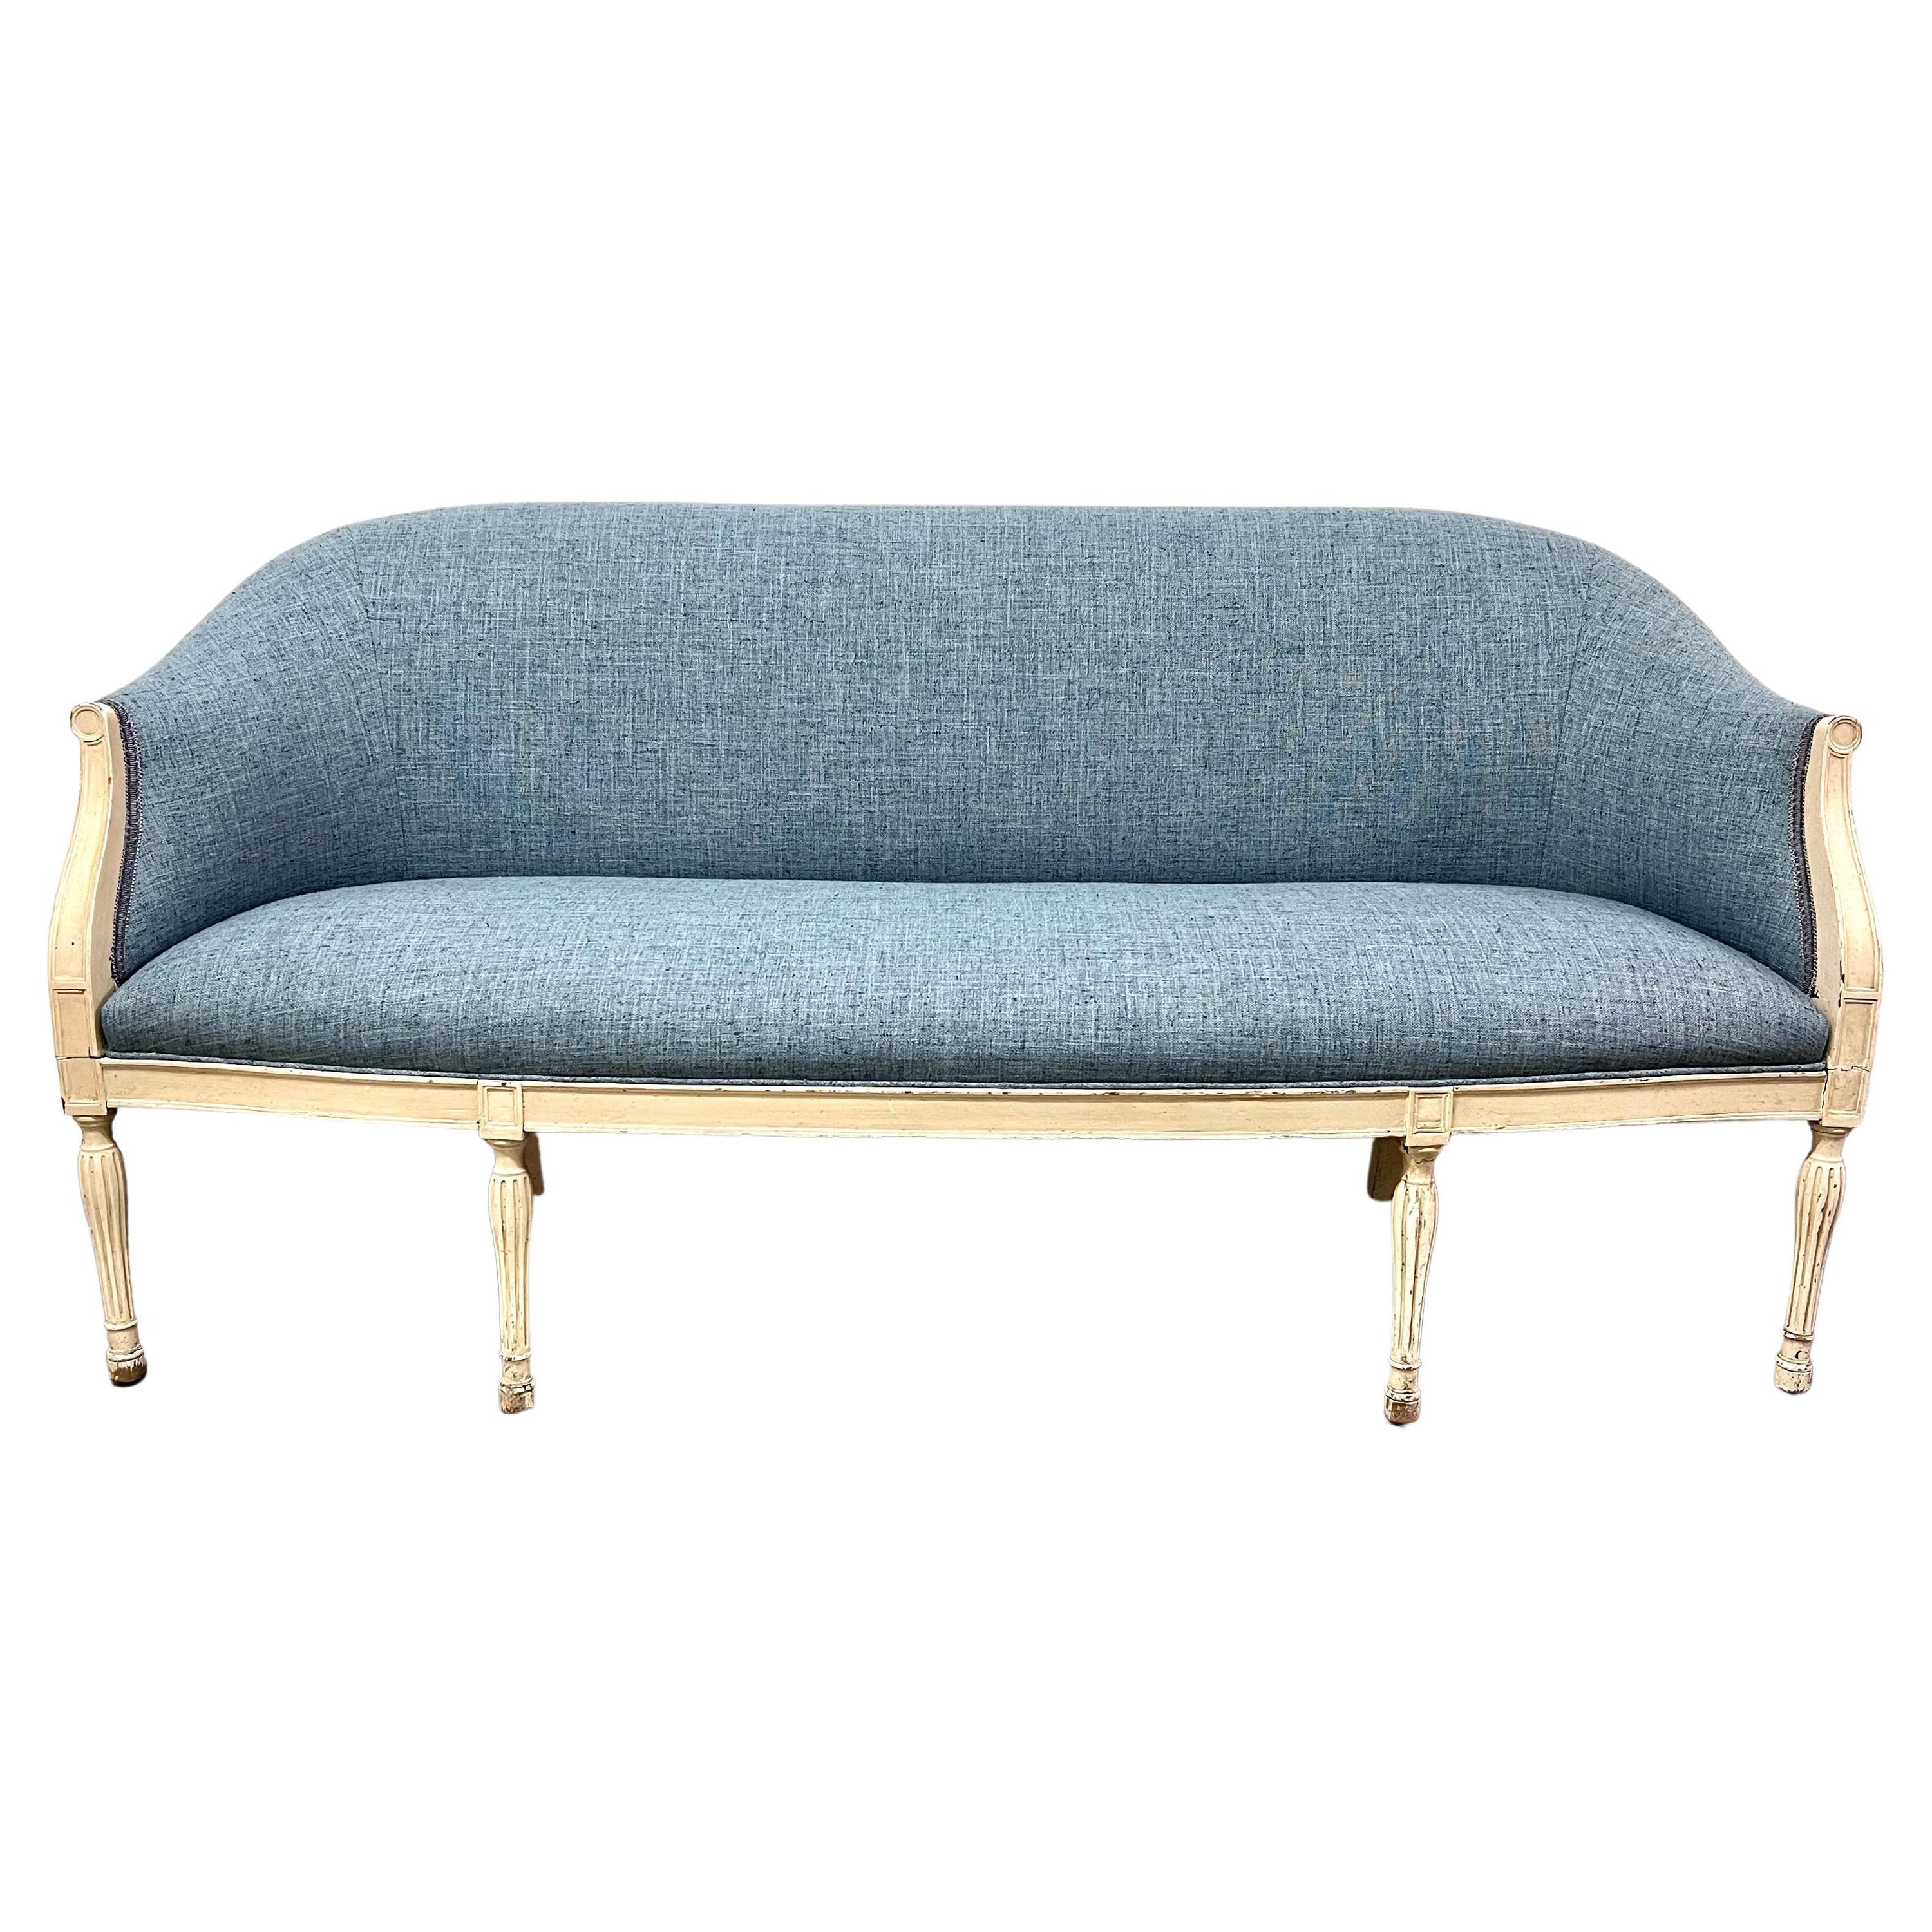 A Louis XVI Style Sofa - the frame is patinated wood with new Beautiful Blue upholstery... the trim is in a blue gray gimp... a stunning piece and a compliment to the Bedroom, guest room, or den. Very comfortable and works in spaces from traditional